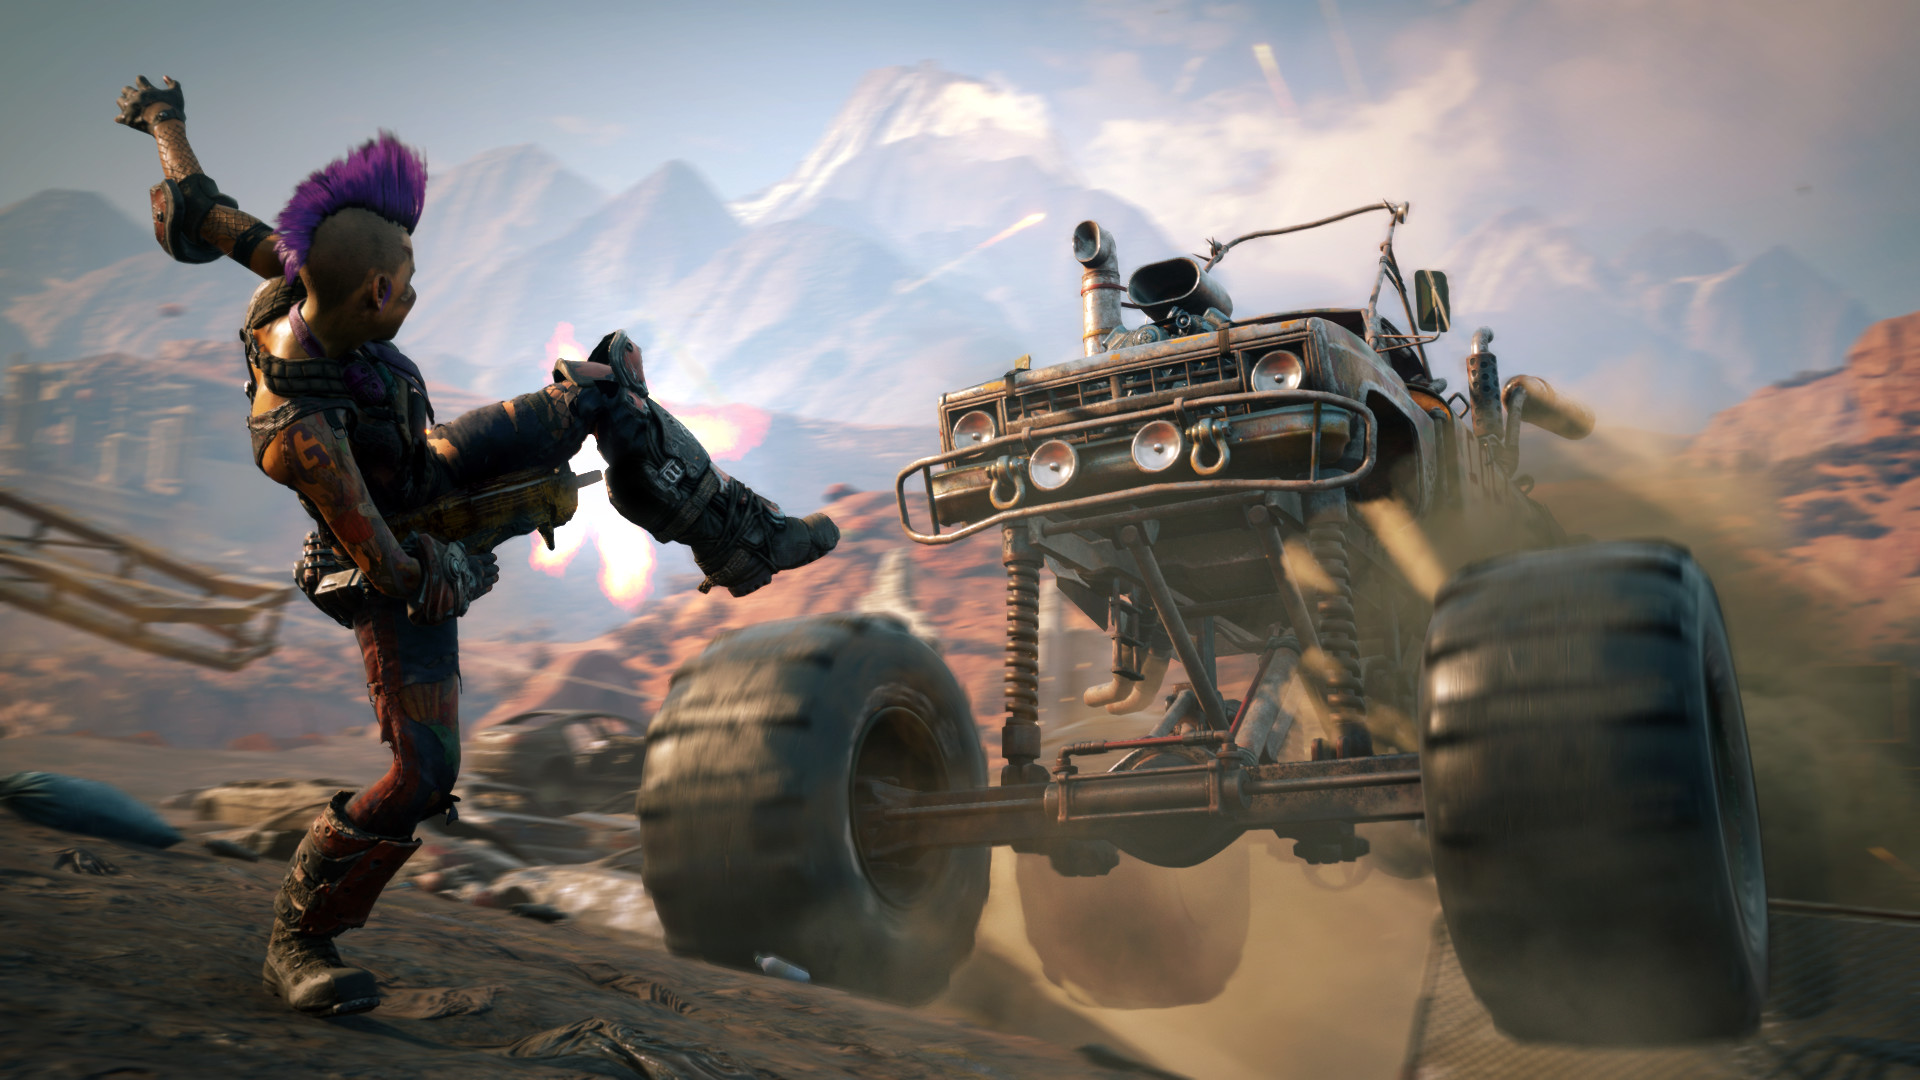 RAGE 2 - Deluxe Edition Pack DLC Steam CD Key 10.16 USD